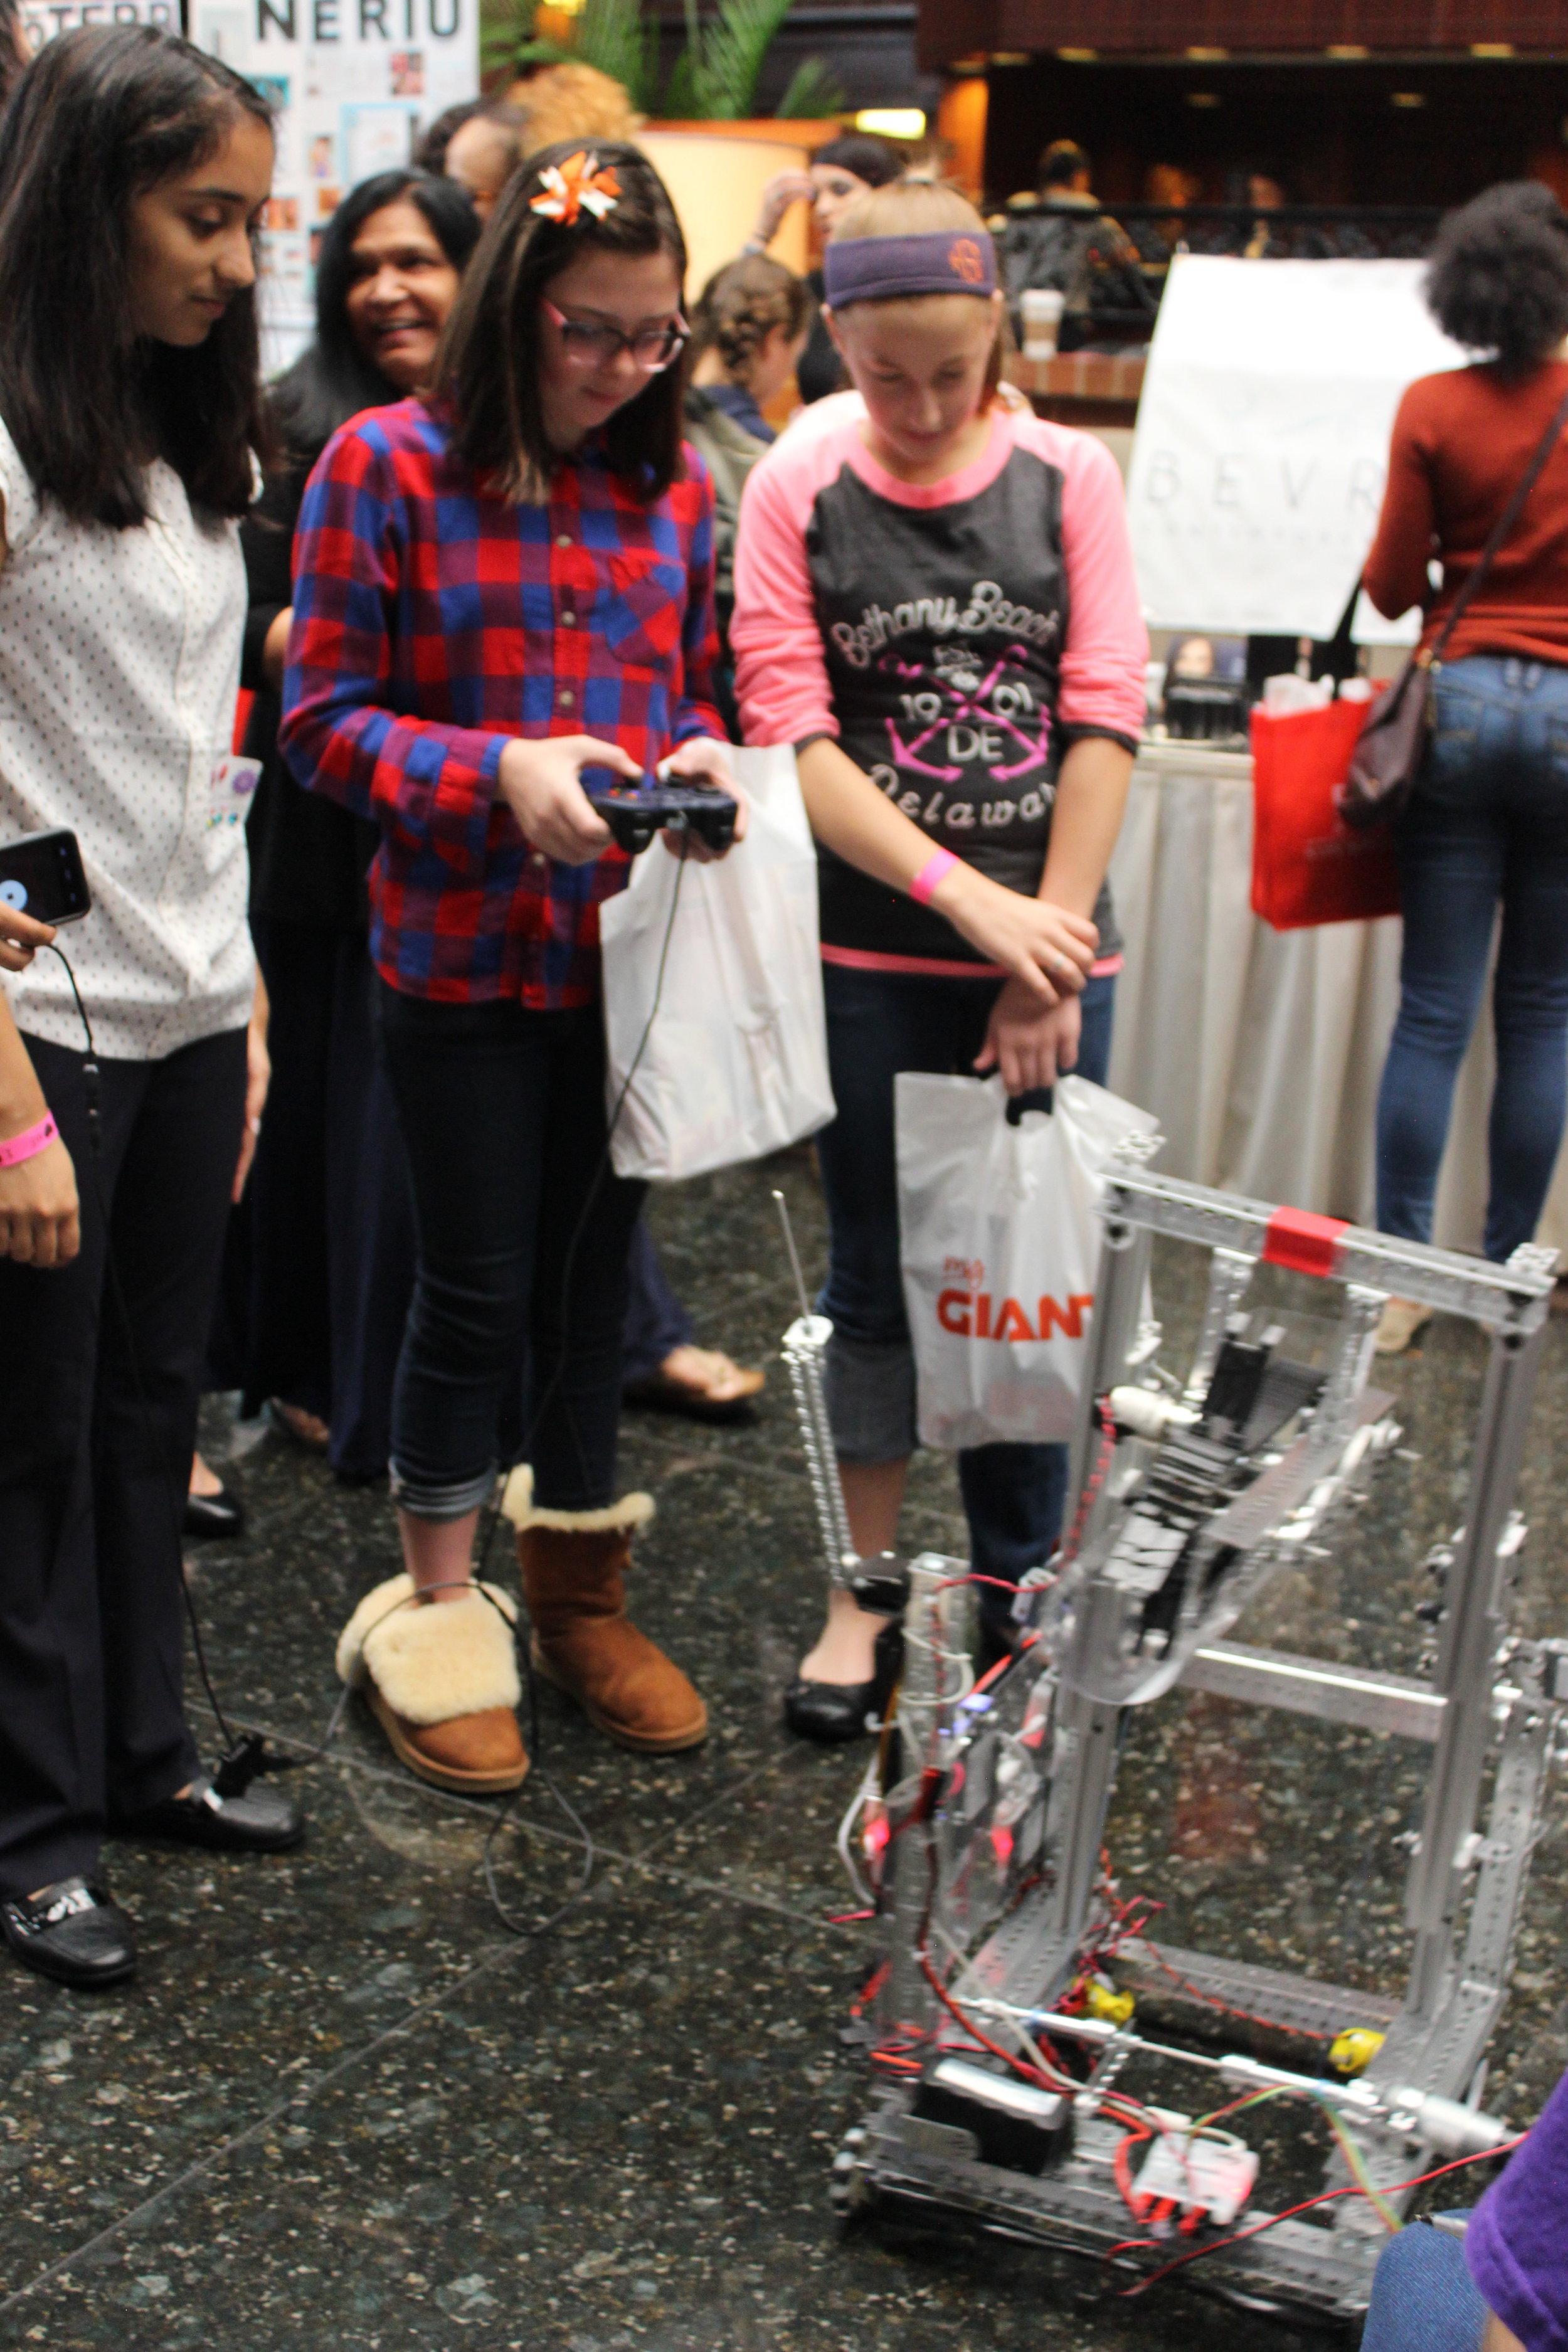  Rachael helps girls learn how to raise the robot's lift using the controllers. Girls World Expo, October 2016. 